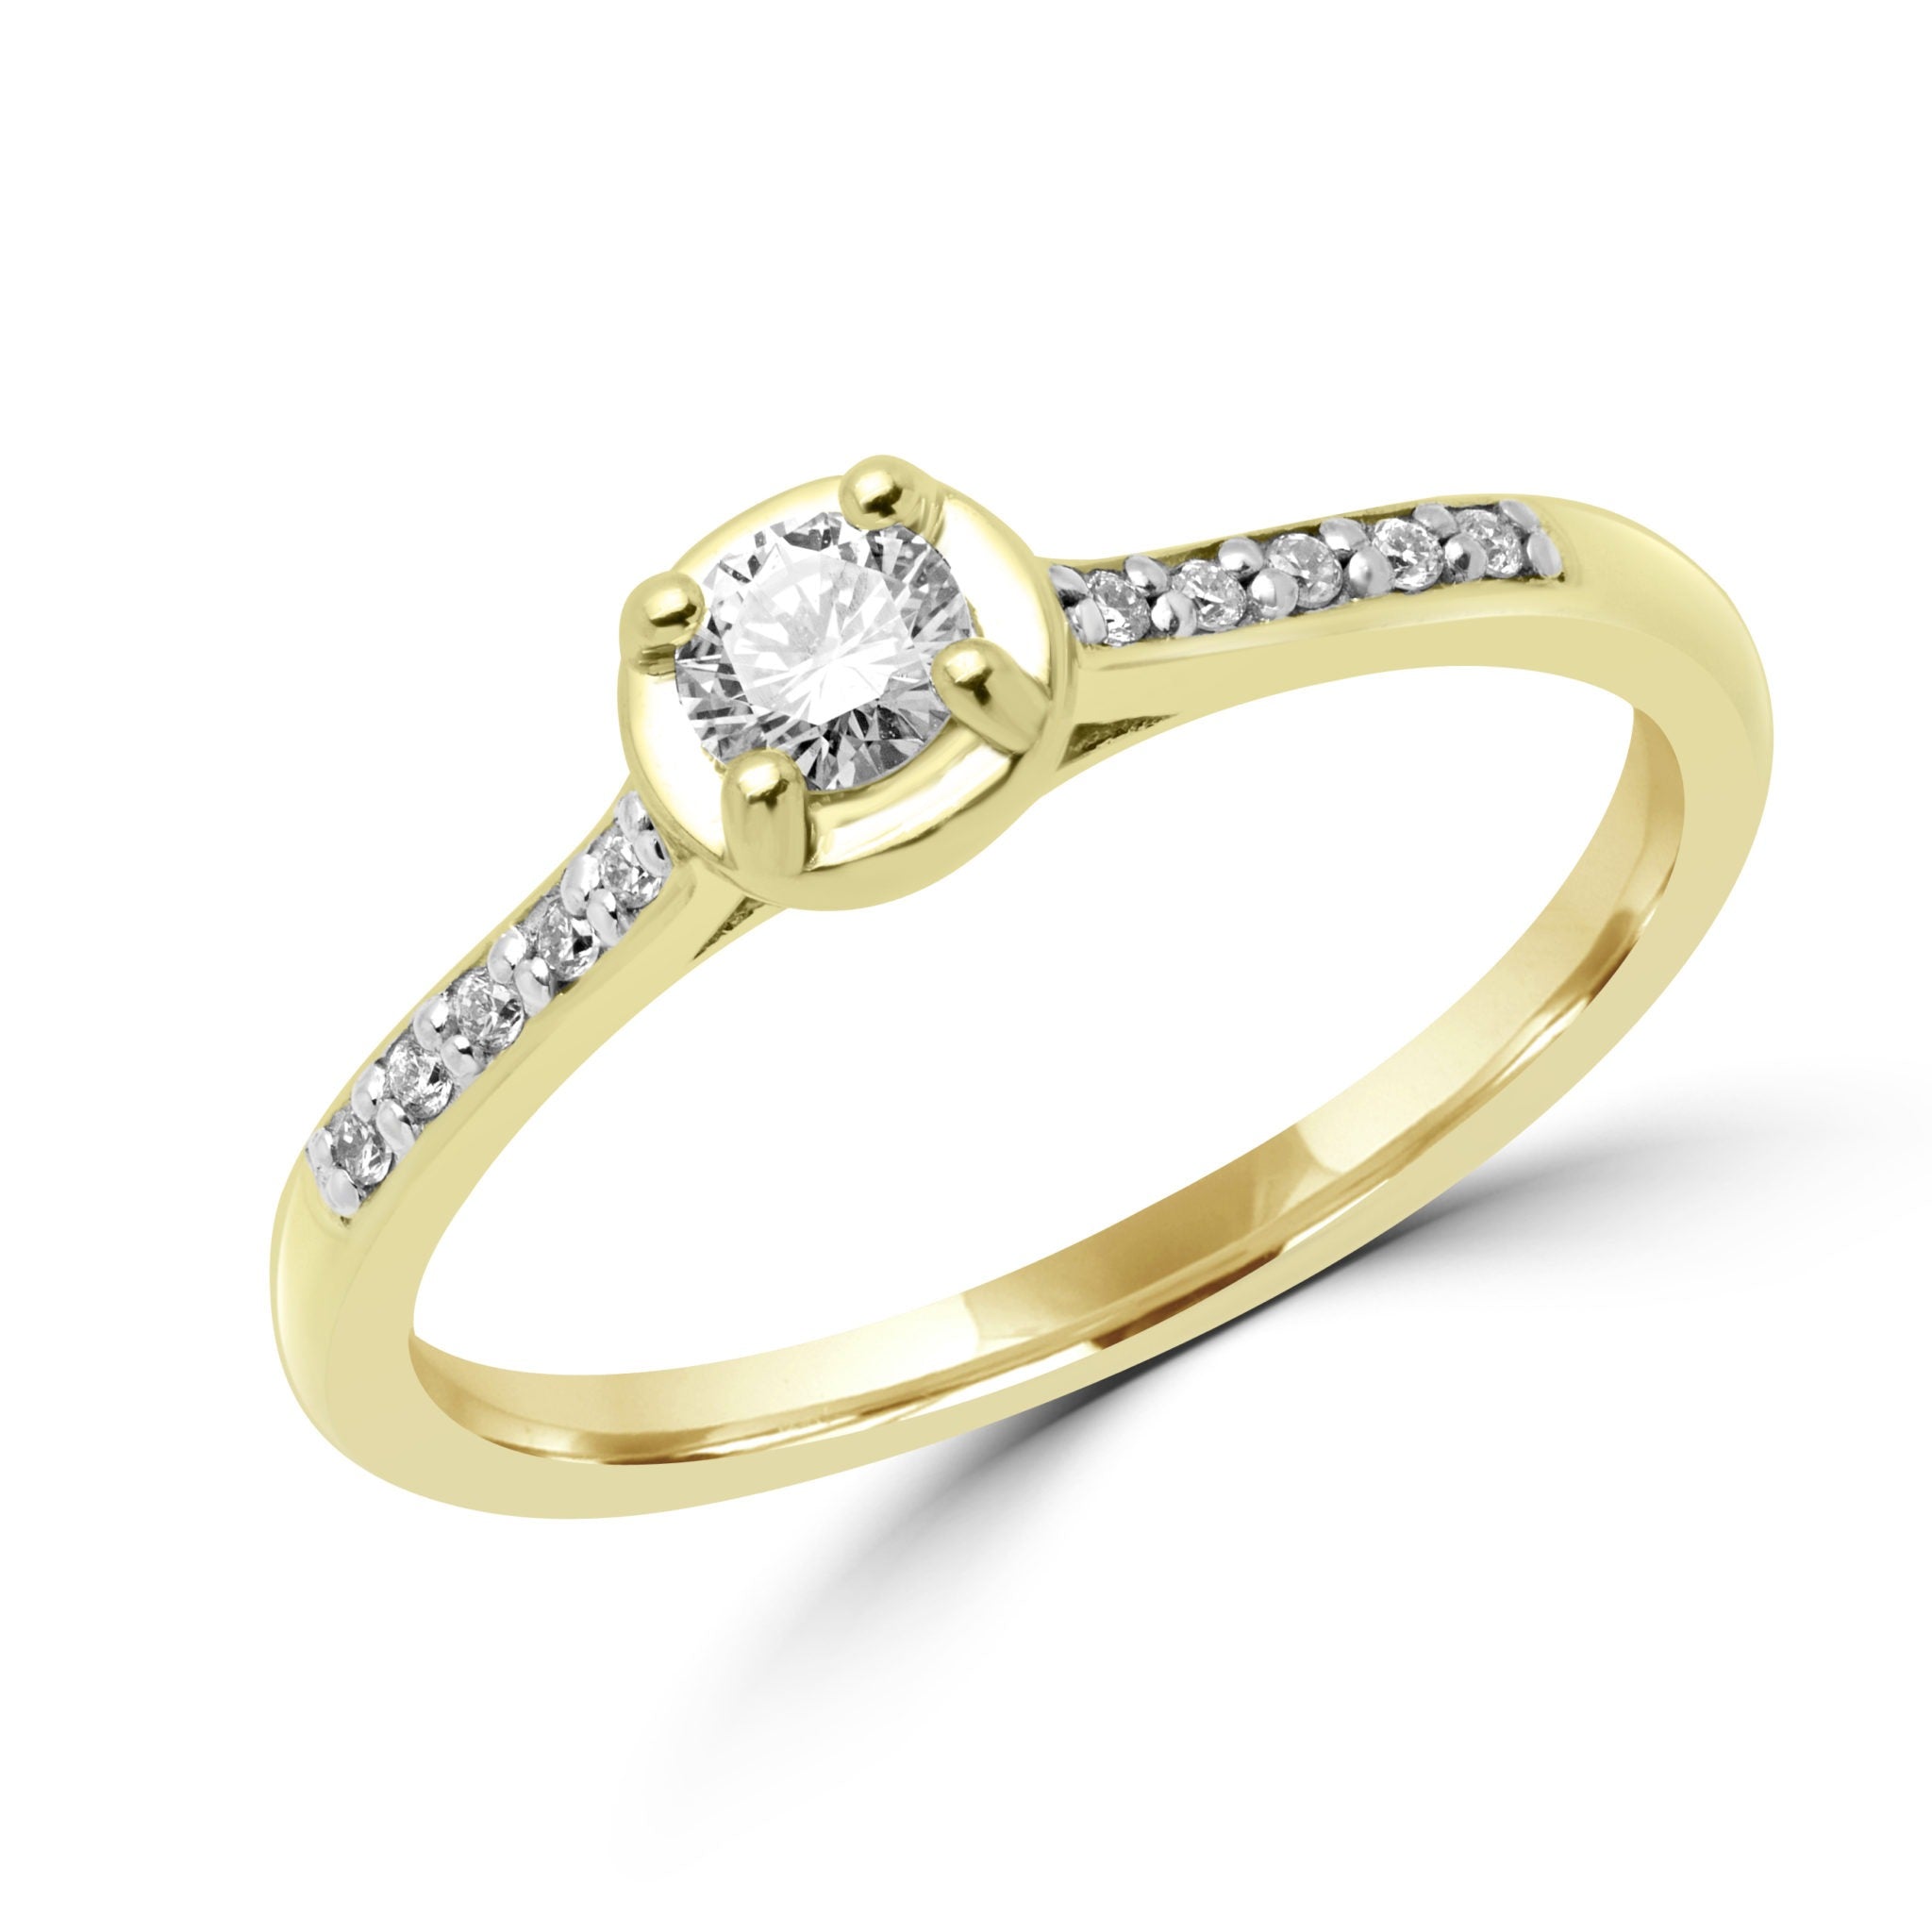 Fashionable solitaire engagement ring 0.28 (ctw) in 10k gold